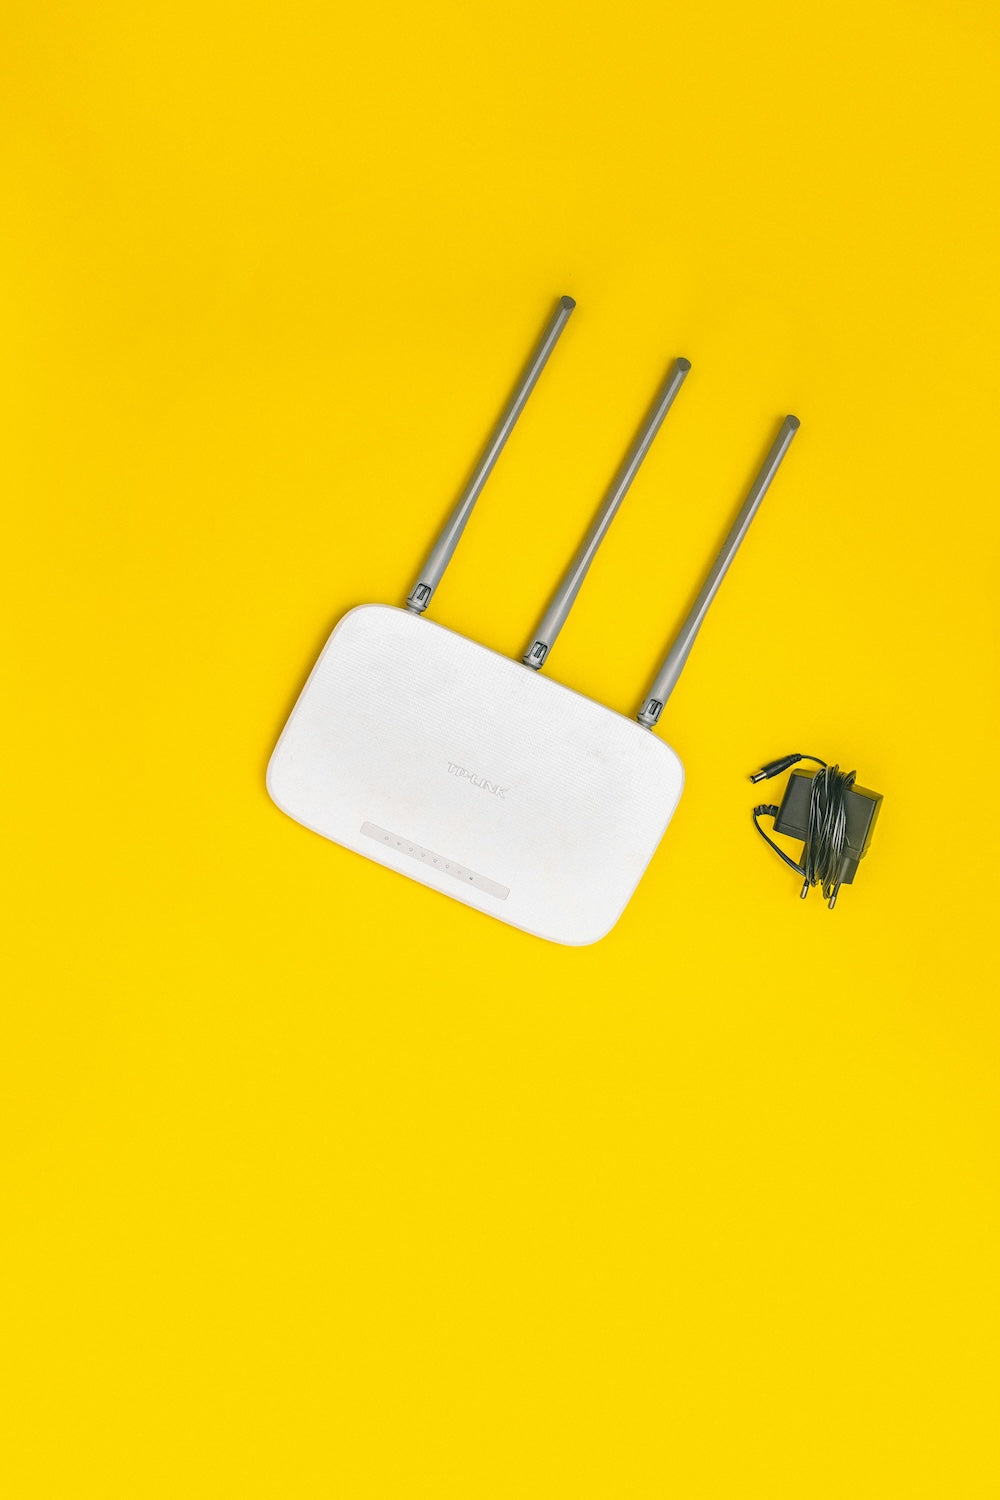 White Wi-Fi router with three antennas and a black cable on a yellow background.